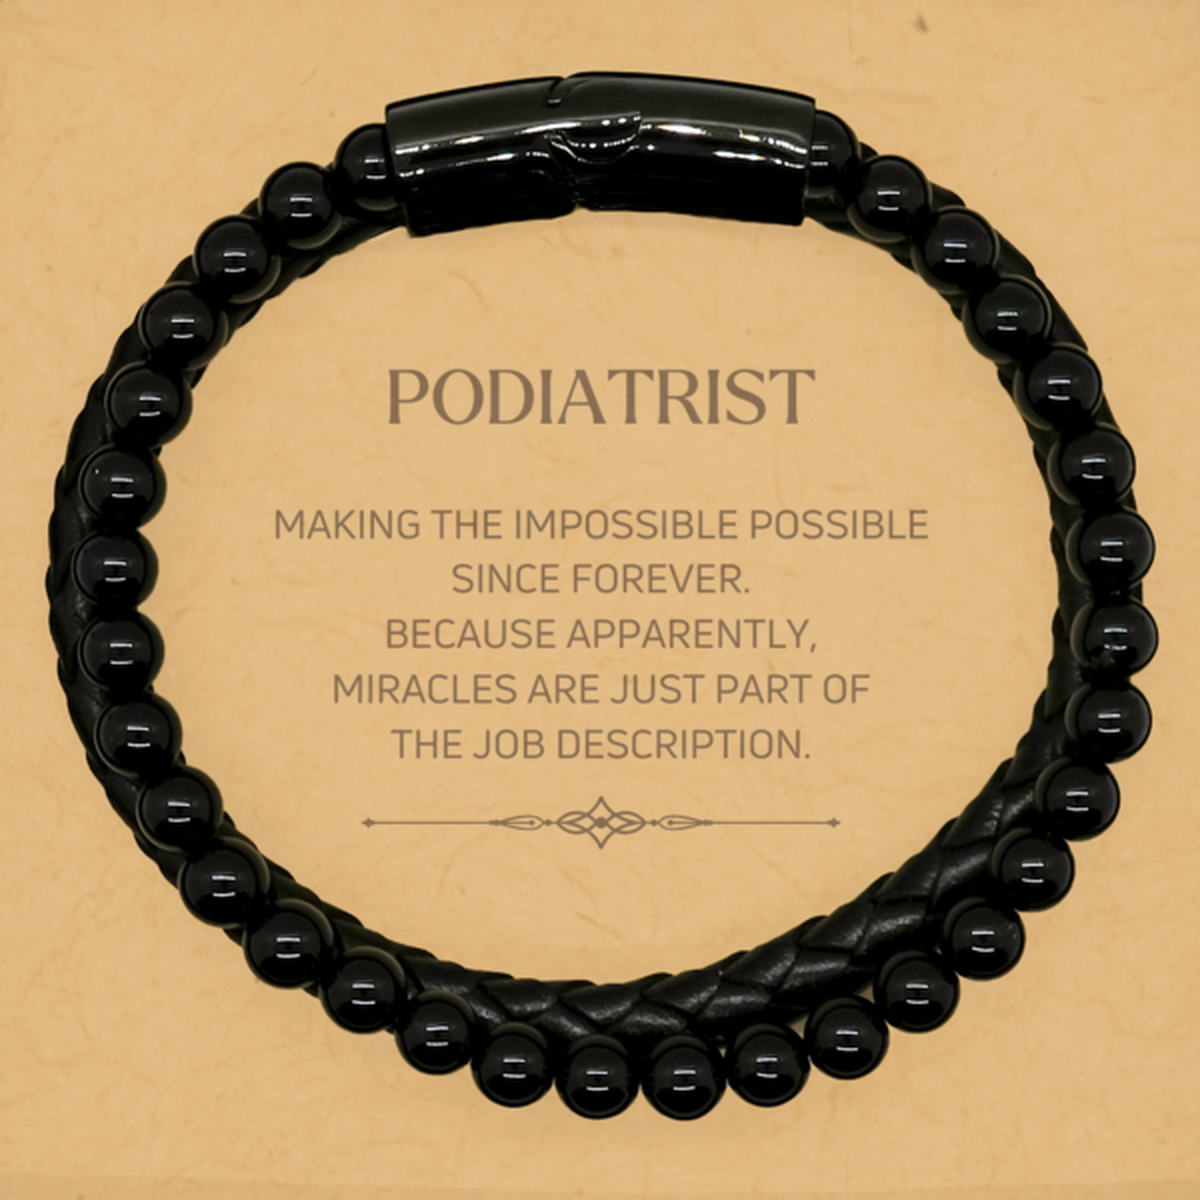 Funny Podiatrist Gifts, Miracles are just part of the job description, Inspirational Birthday Stone Leather Bracelets For Podiatrist, Men, Women, Coworkers, Friends, Boss